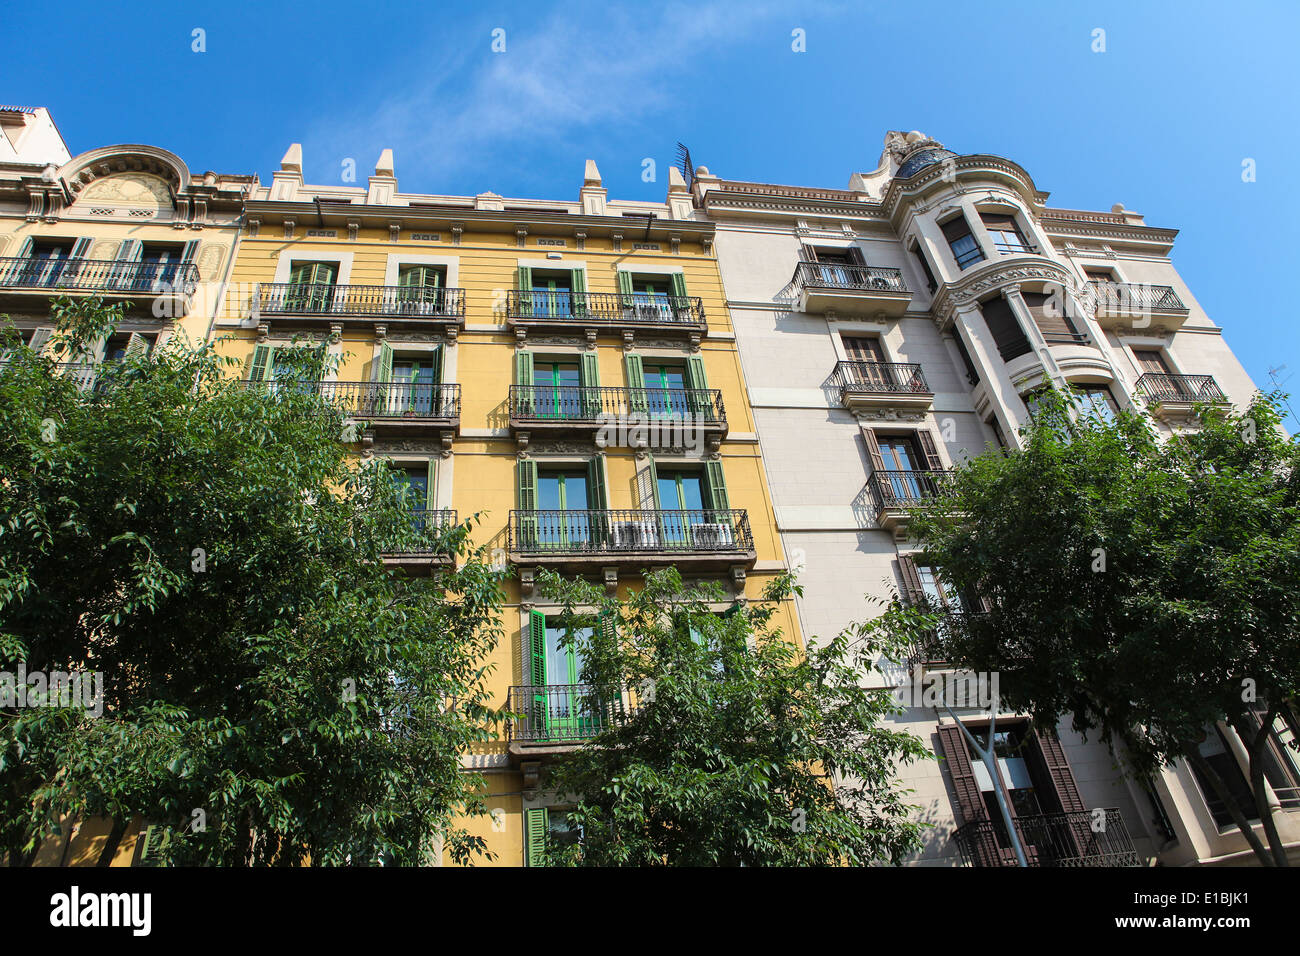 Typical architecture in the center of Barcelona, Spain Stock Photo